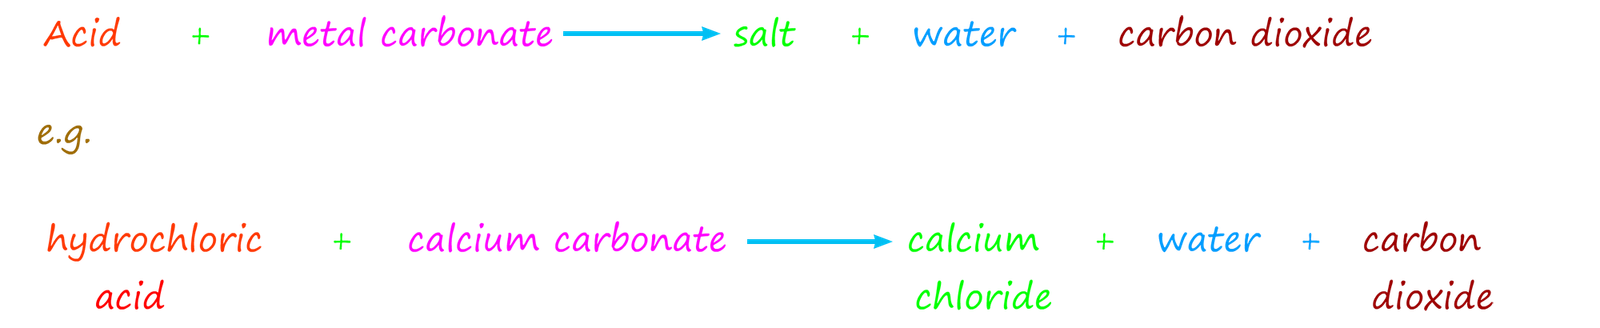 equation to show a metal carbonate reacting with acid